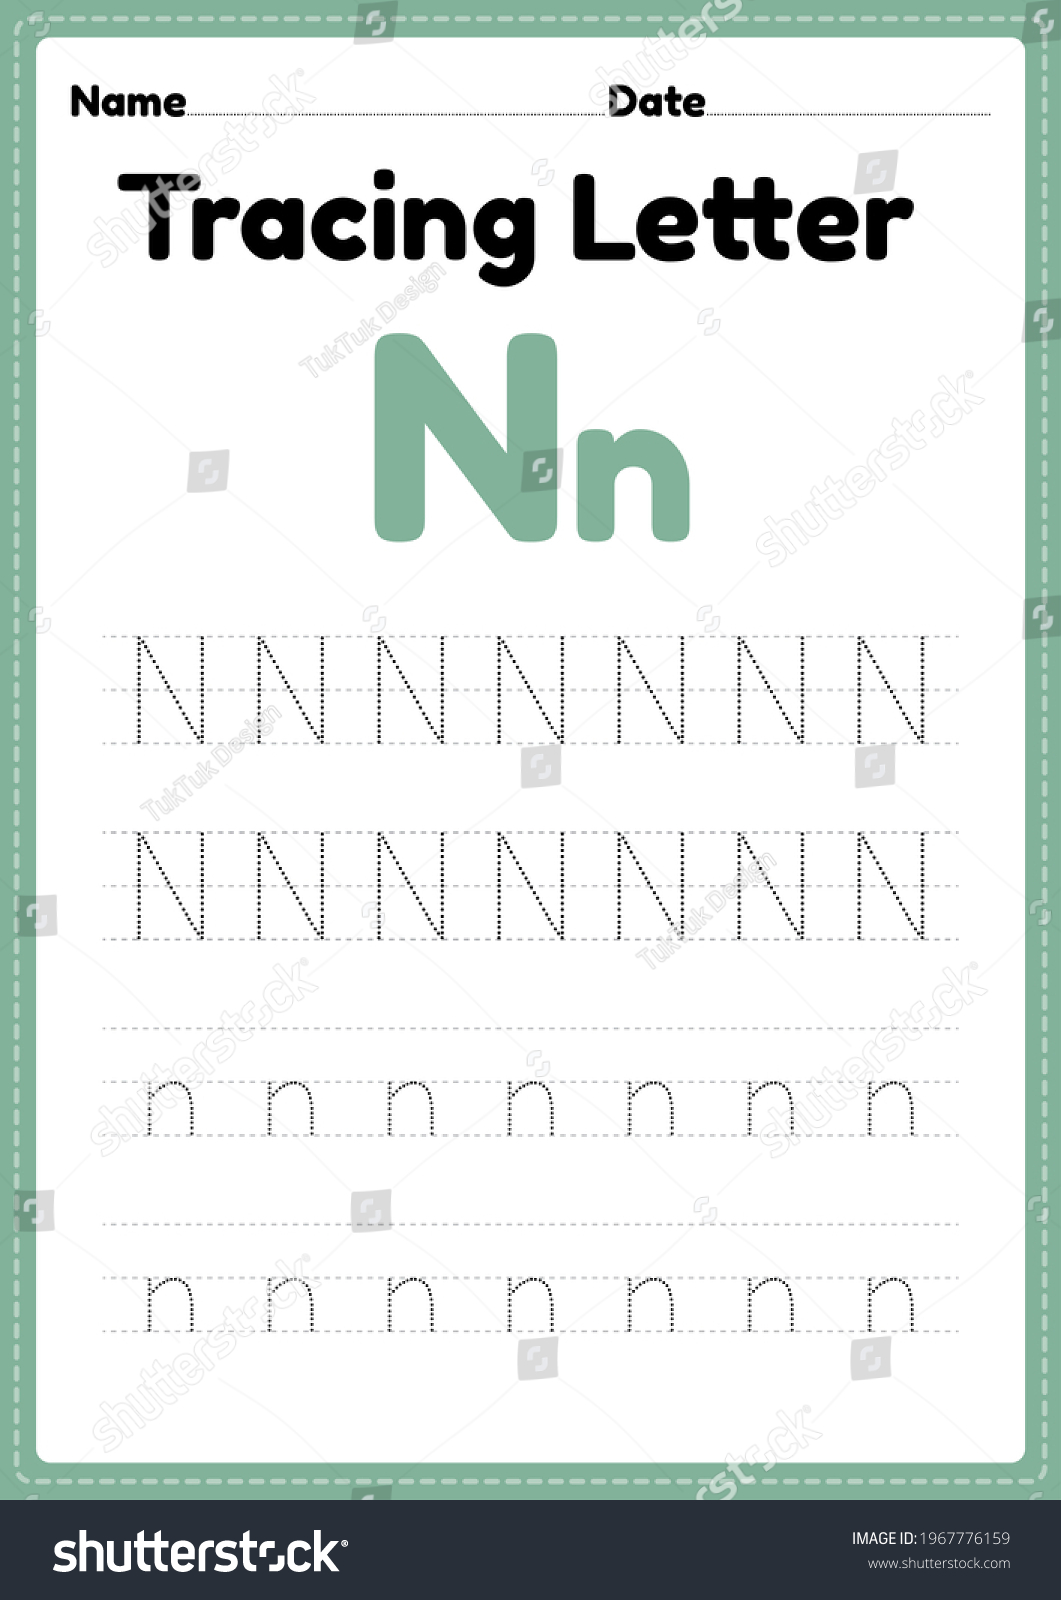 tracing letter n